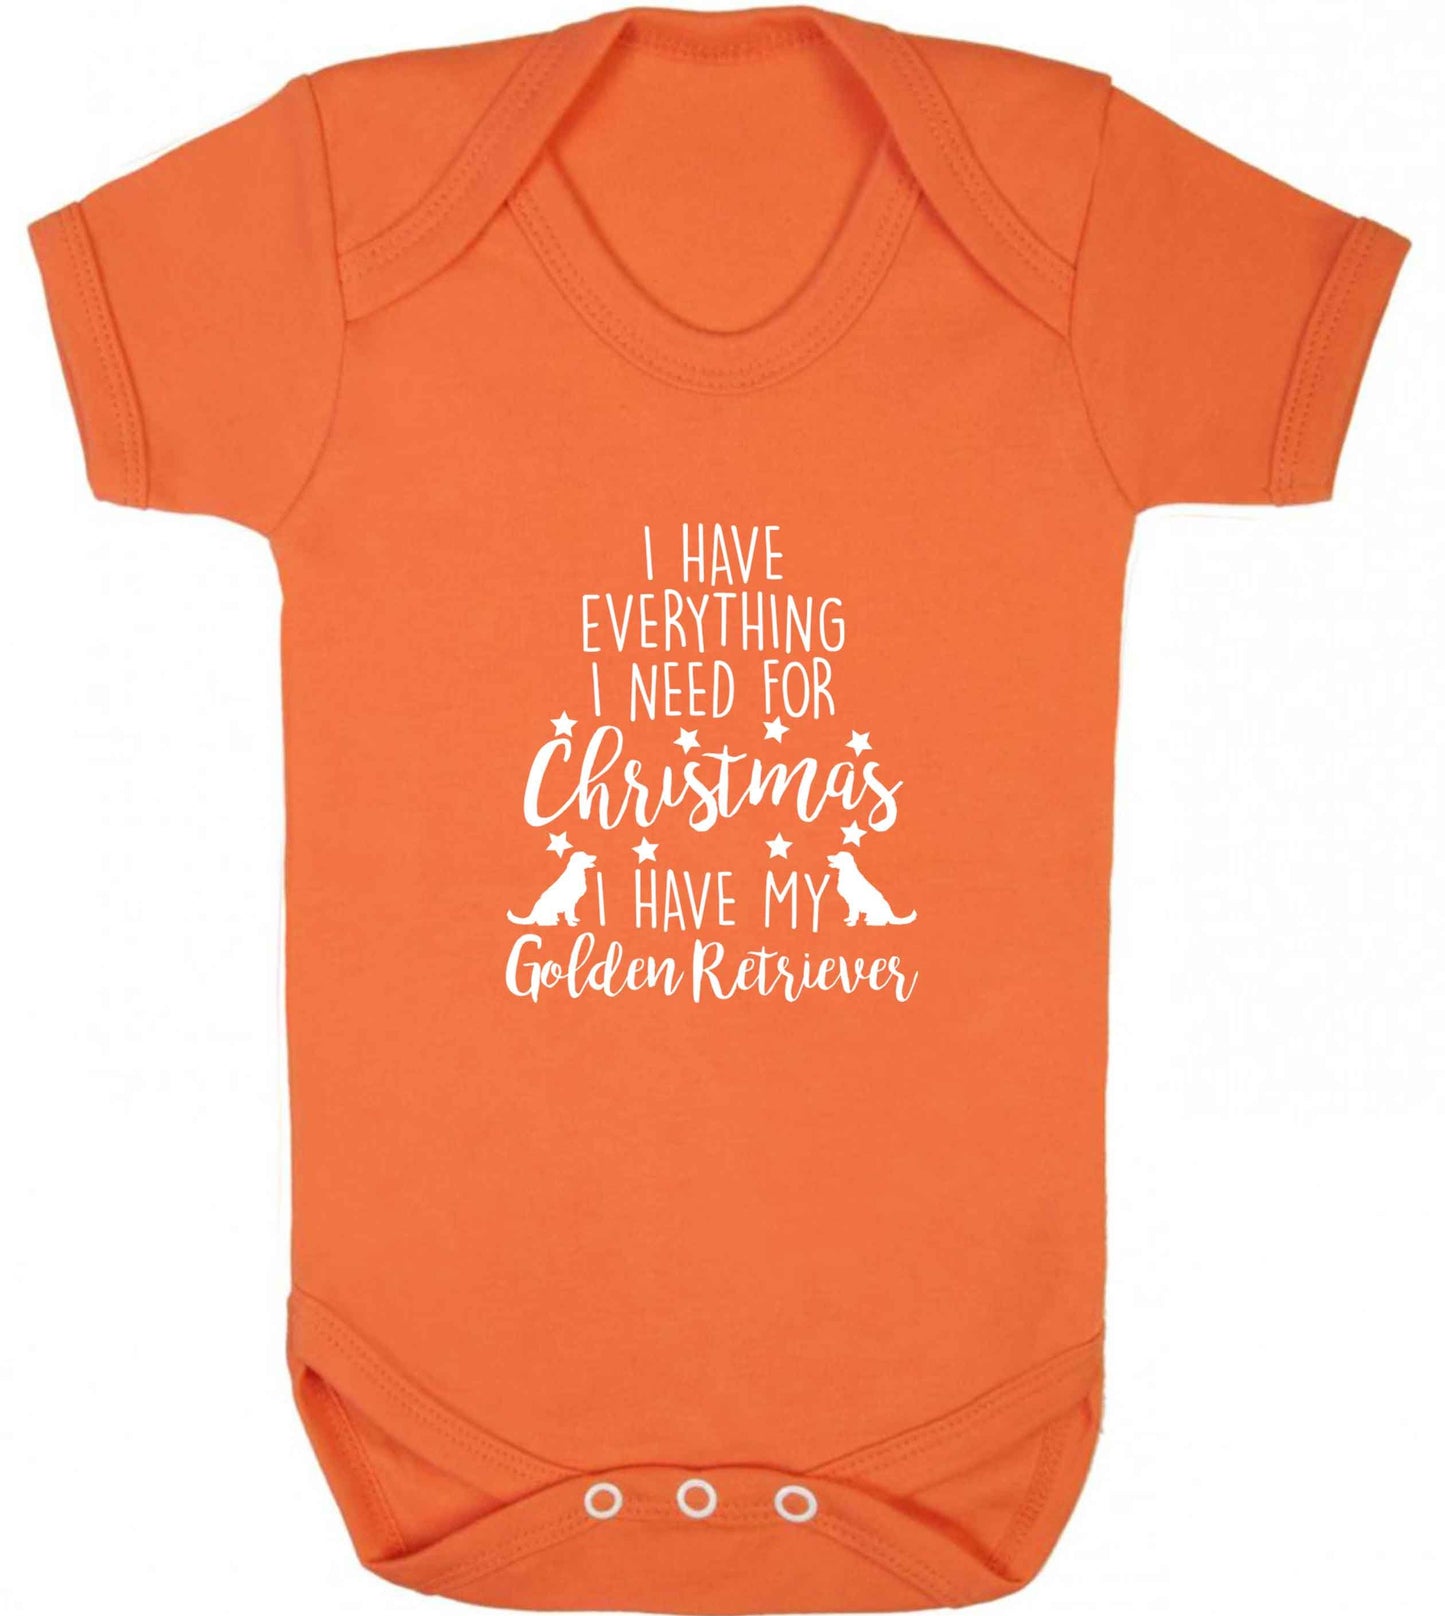 I have everything I need for Christmas I have my golden retriever baby vest orange 18-24 months